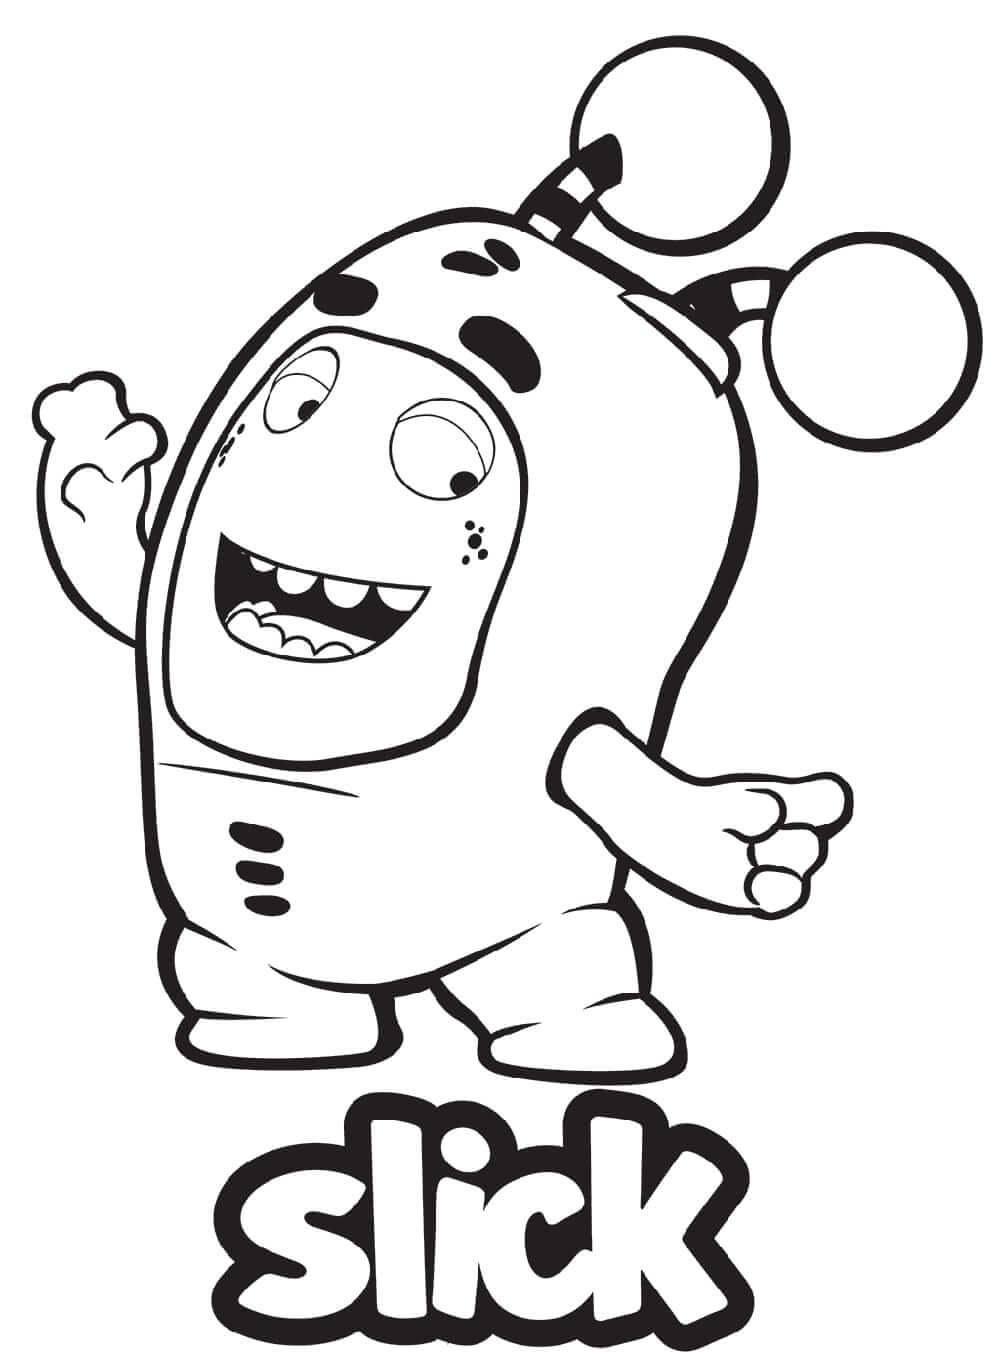 Slick Oddbods Coloring Page - Free Printable Coloring Pages for Kids